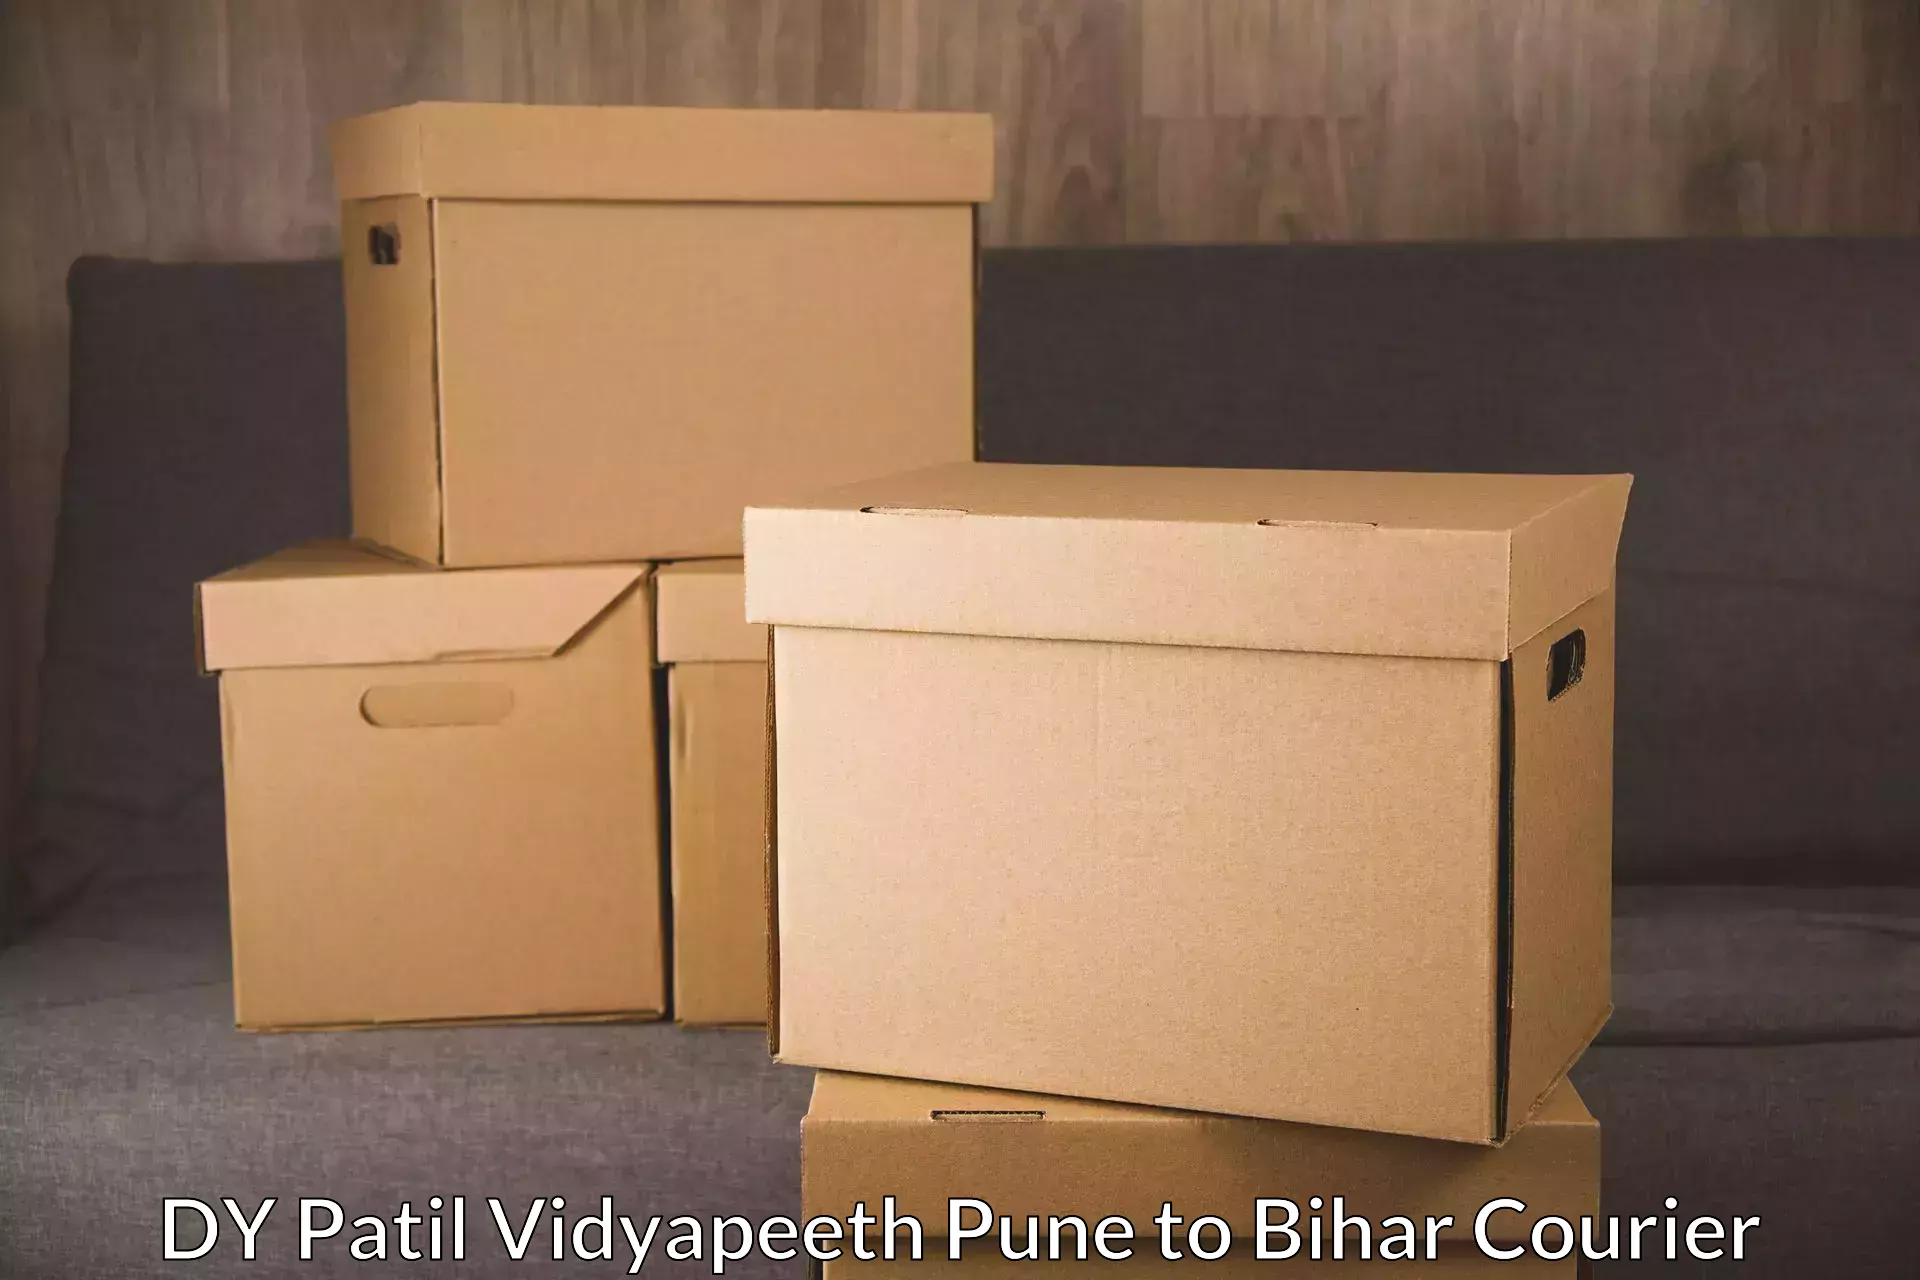 Next-generation courier services DY Patil Vidyapeeth Pune to Sikandara Jamui